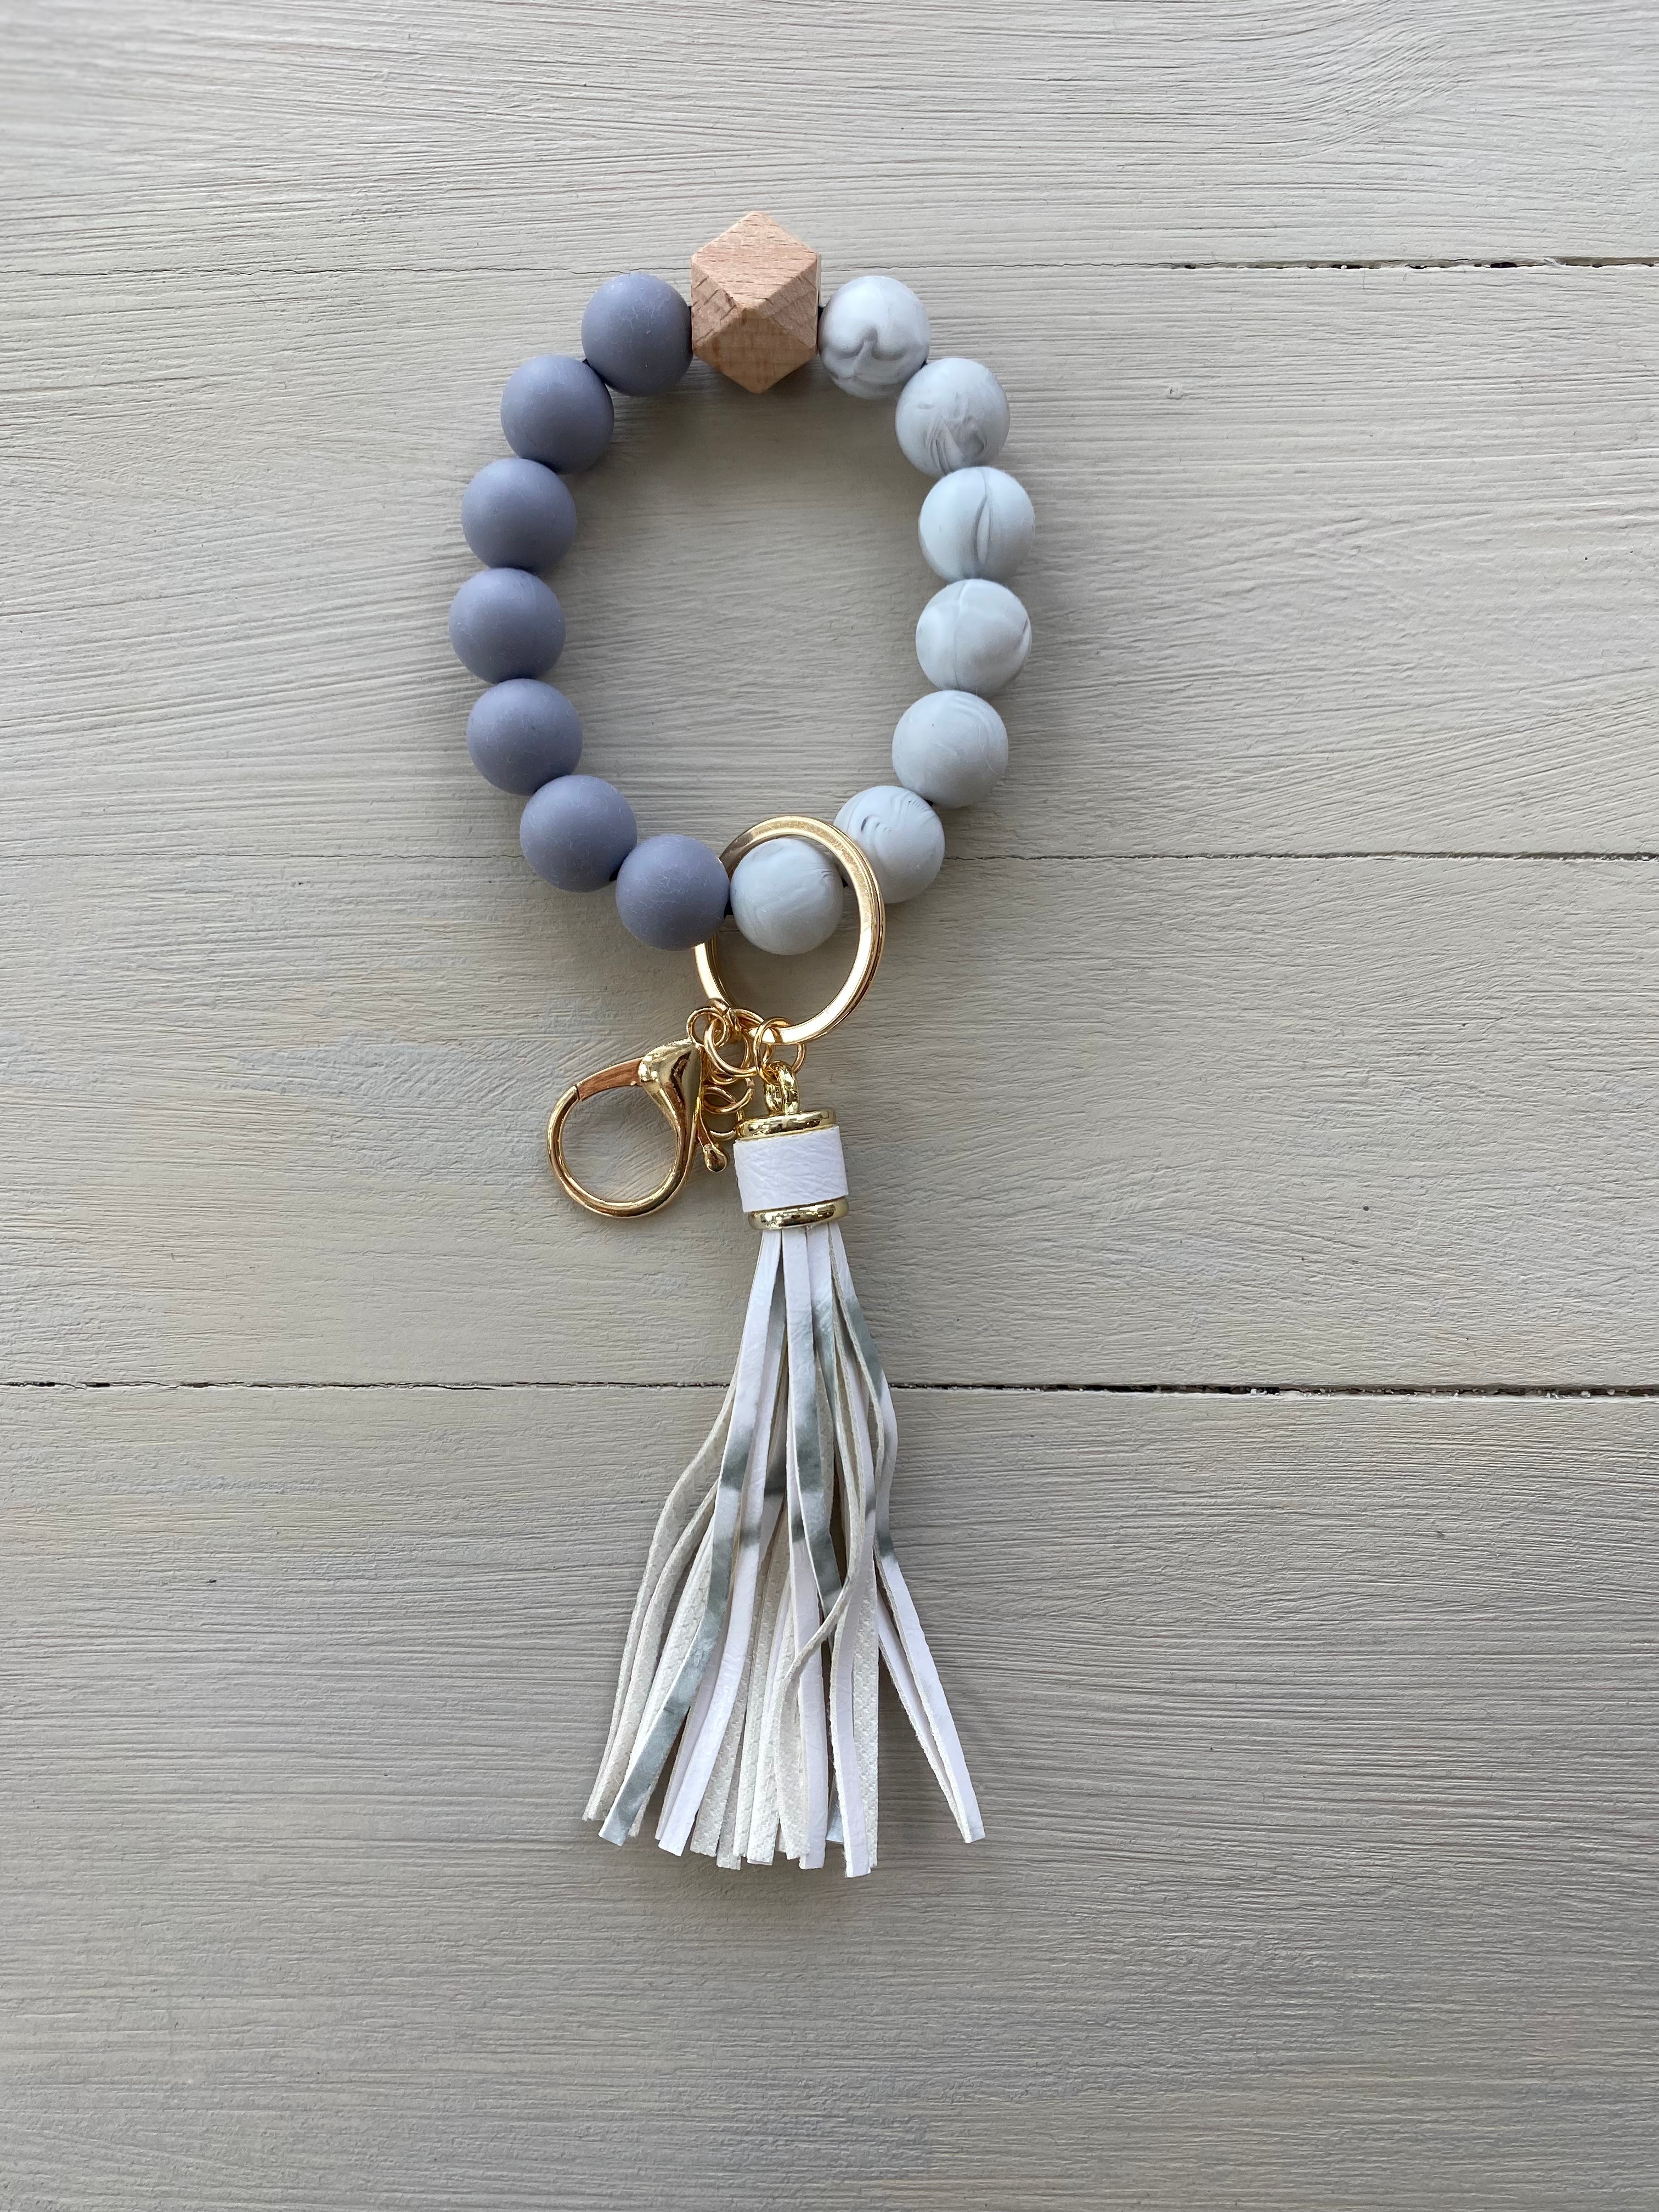 SVF Soft Dark Grey and Light Grey Marble Silicone Wristlet Beaded Key Chain Bracelet with Tassel and Motivational Engraved Acrylic Charm of choice! The Mustard Seed Collection, The Seed